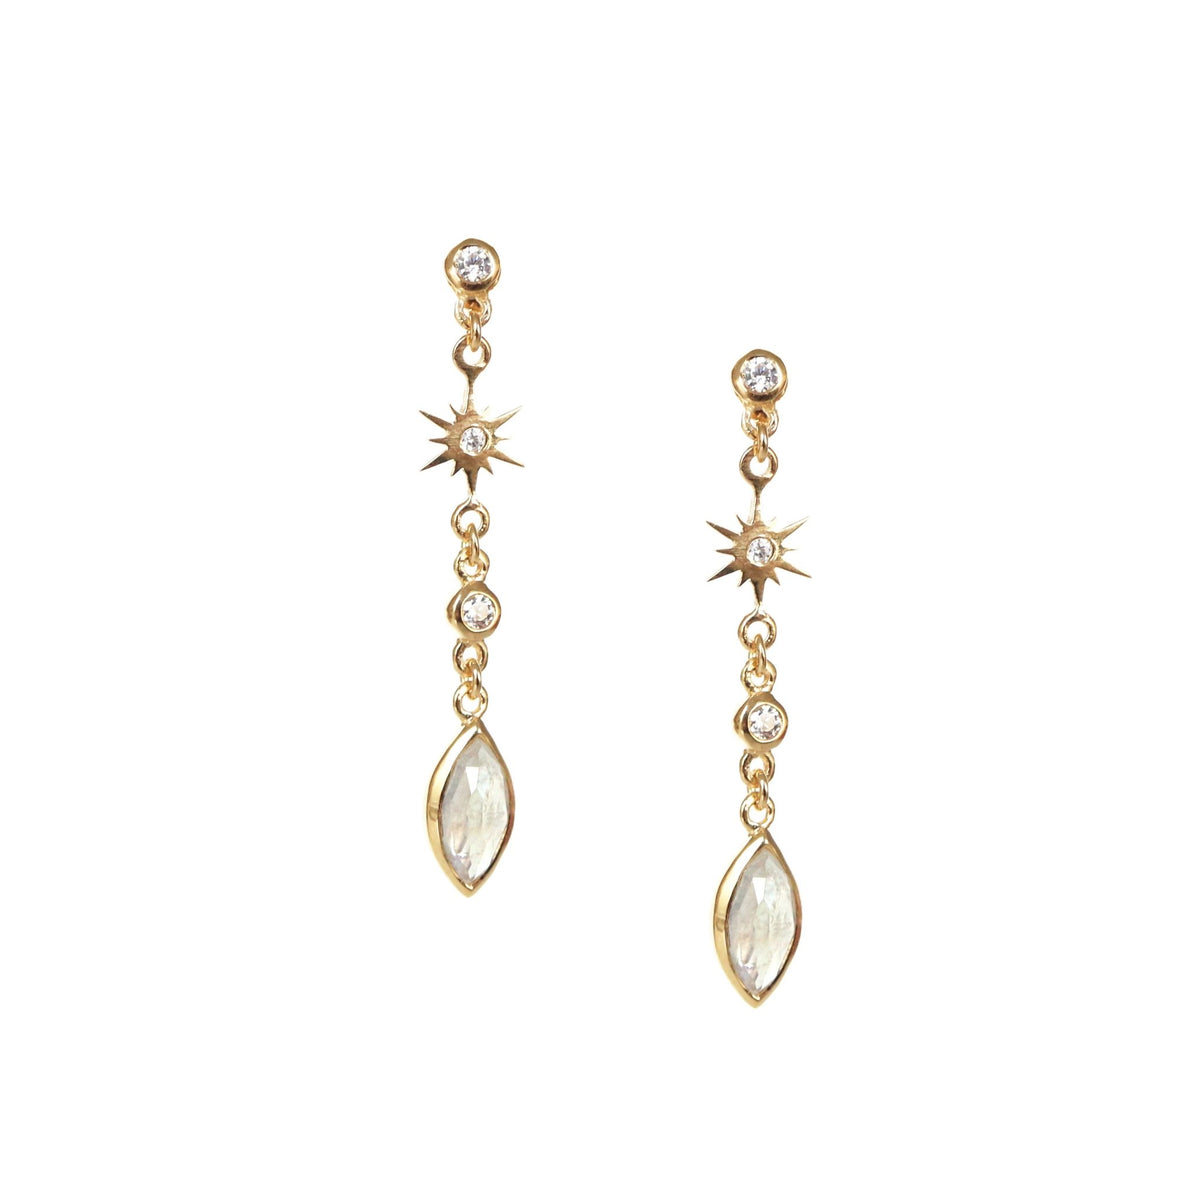 TINY BELIEVE MARQUISE DROP EARRINGS - CUBIC ZIRCONIA, MOONSTONE &amp; GOLD - SO PRETTY CARA COTTER